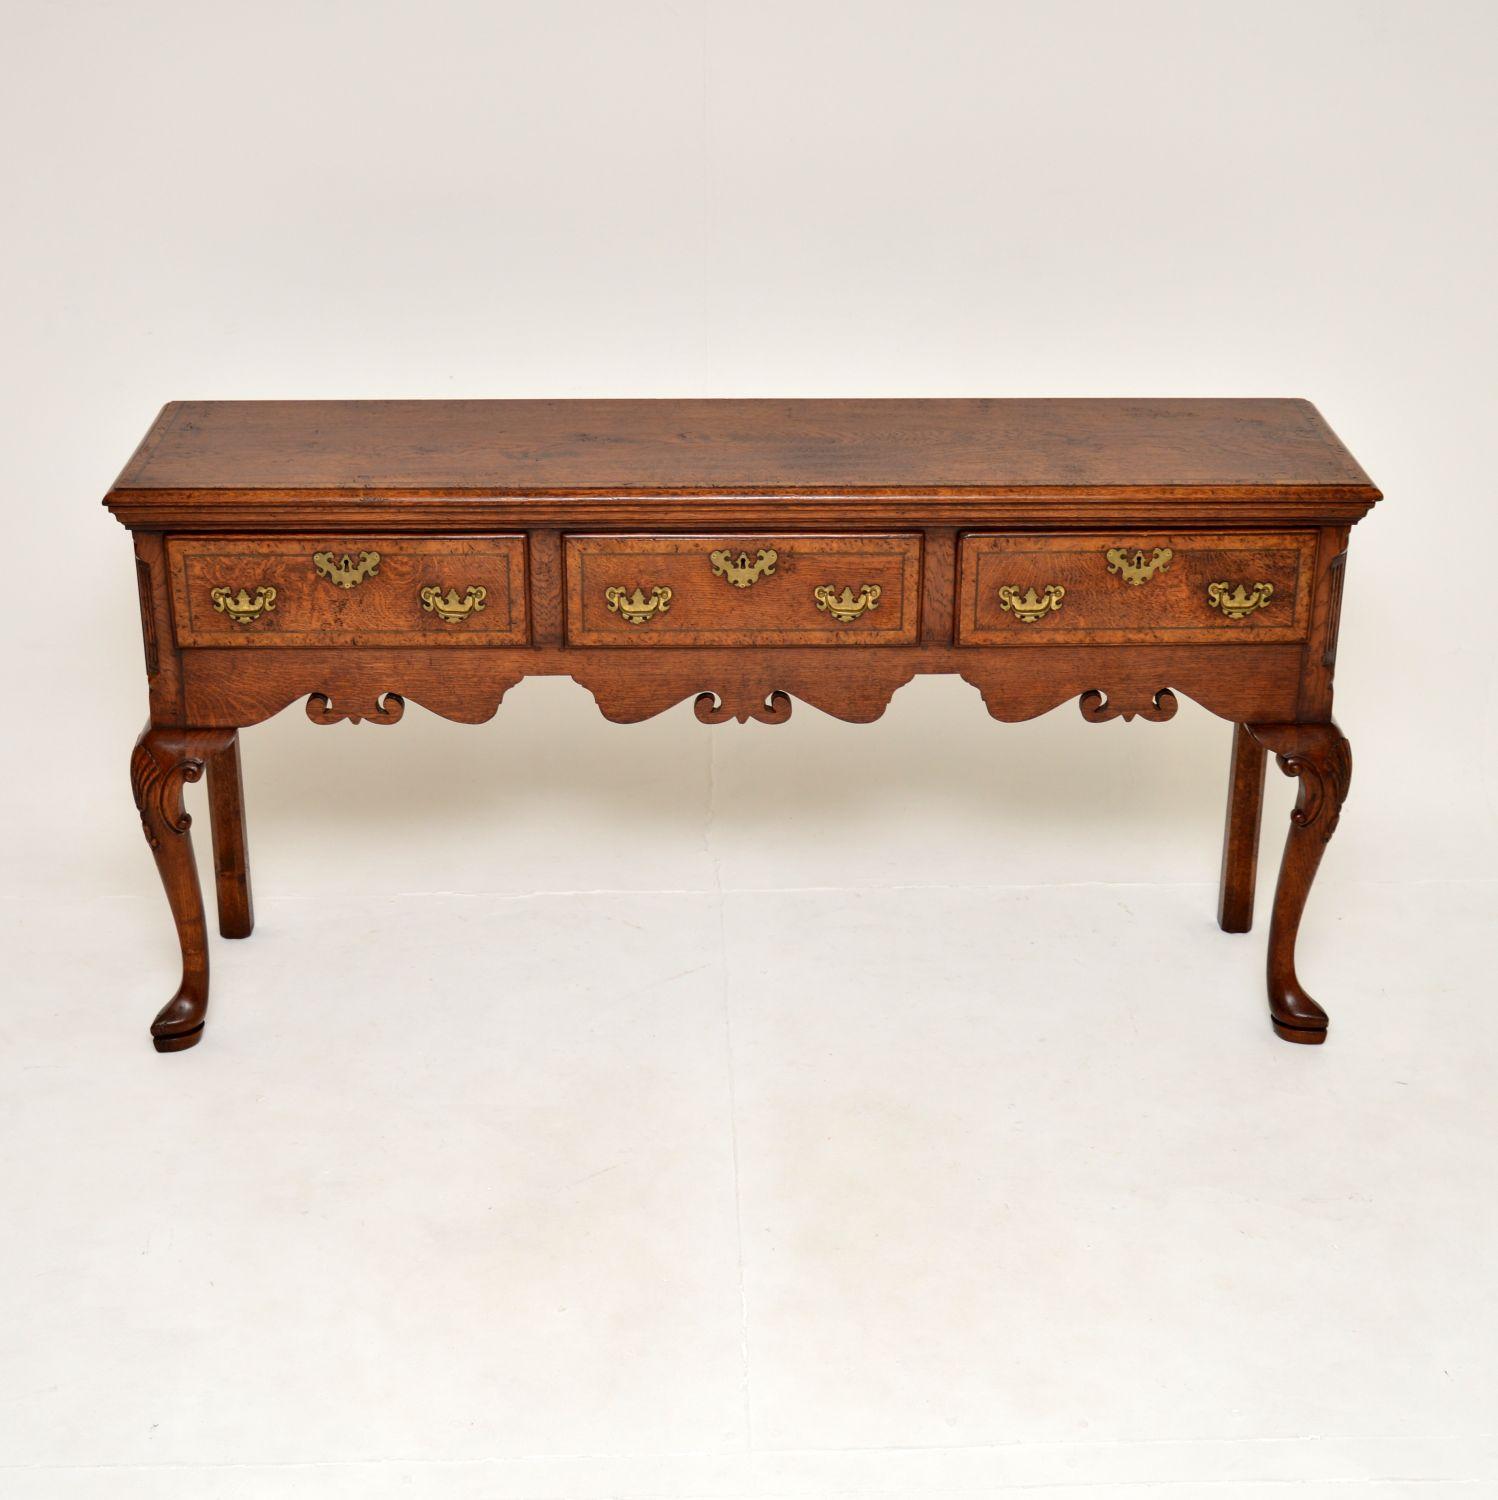 A superb antique Georgian style console / side table in pollard oak. This was made in England, it dates from around the 1950’s. It comes under the category of “Ipswich Oak”, which is well known in the trade to be the best quality hand made furniture